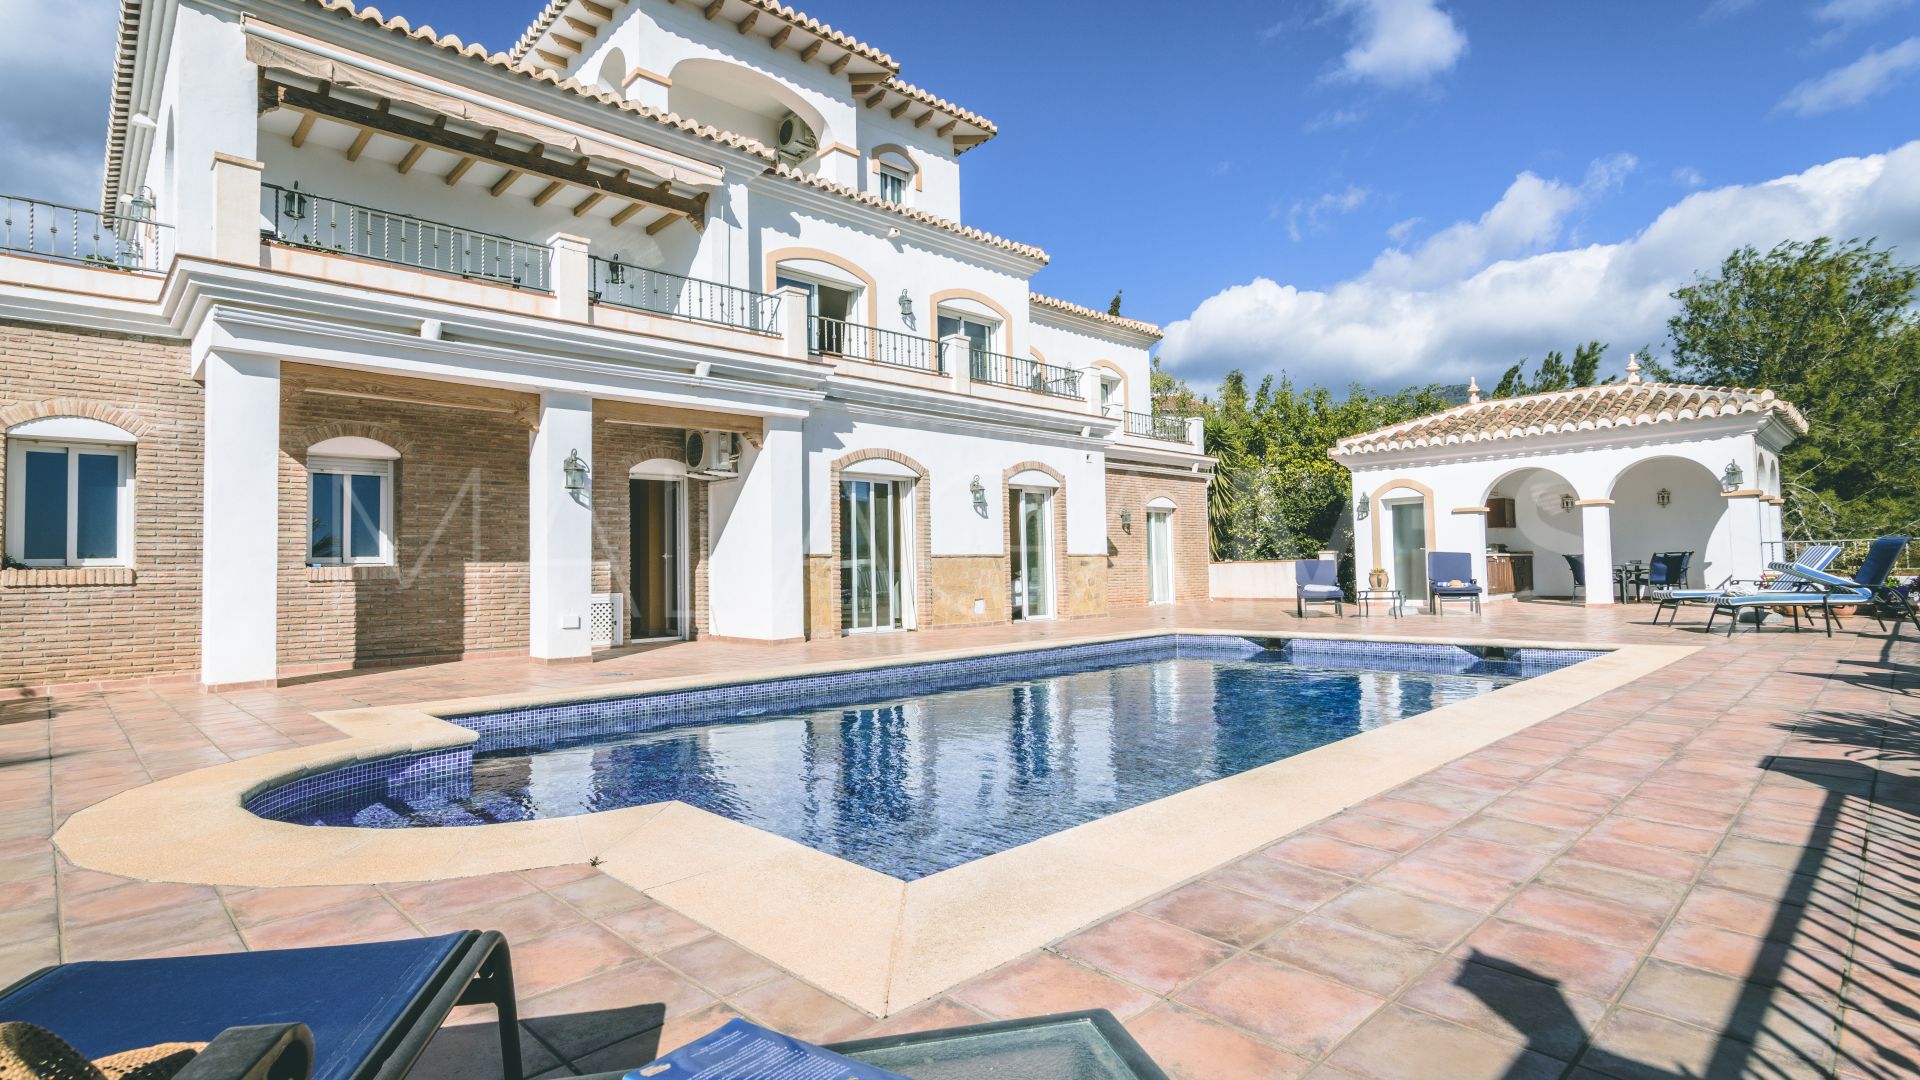 Casa for sale with 5 bedrooms in Frigiliana